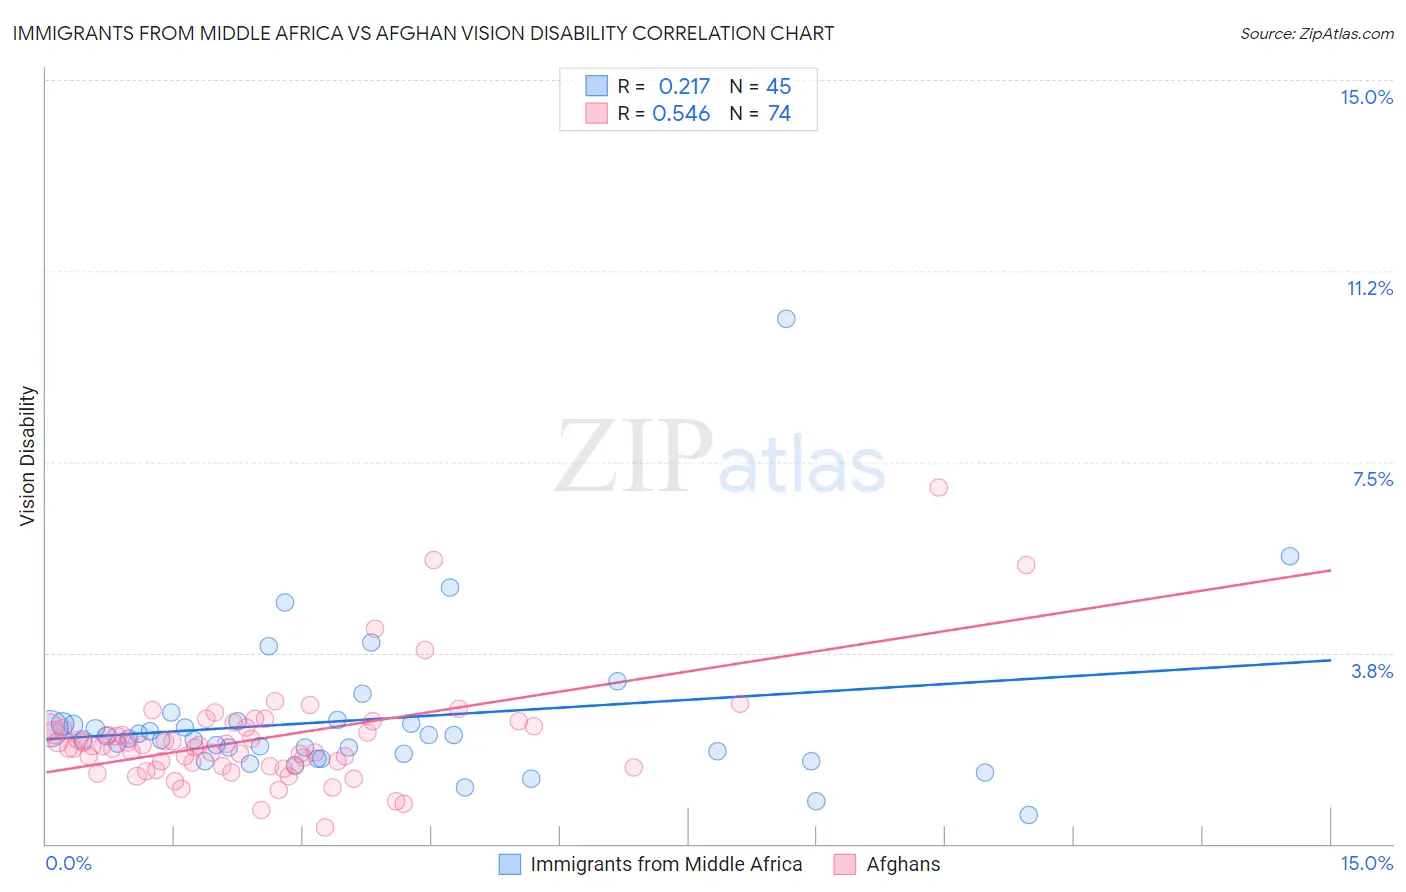 Immigrants from Middle Africa vs Afghan Vision Disability